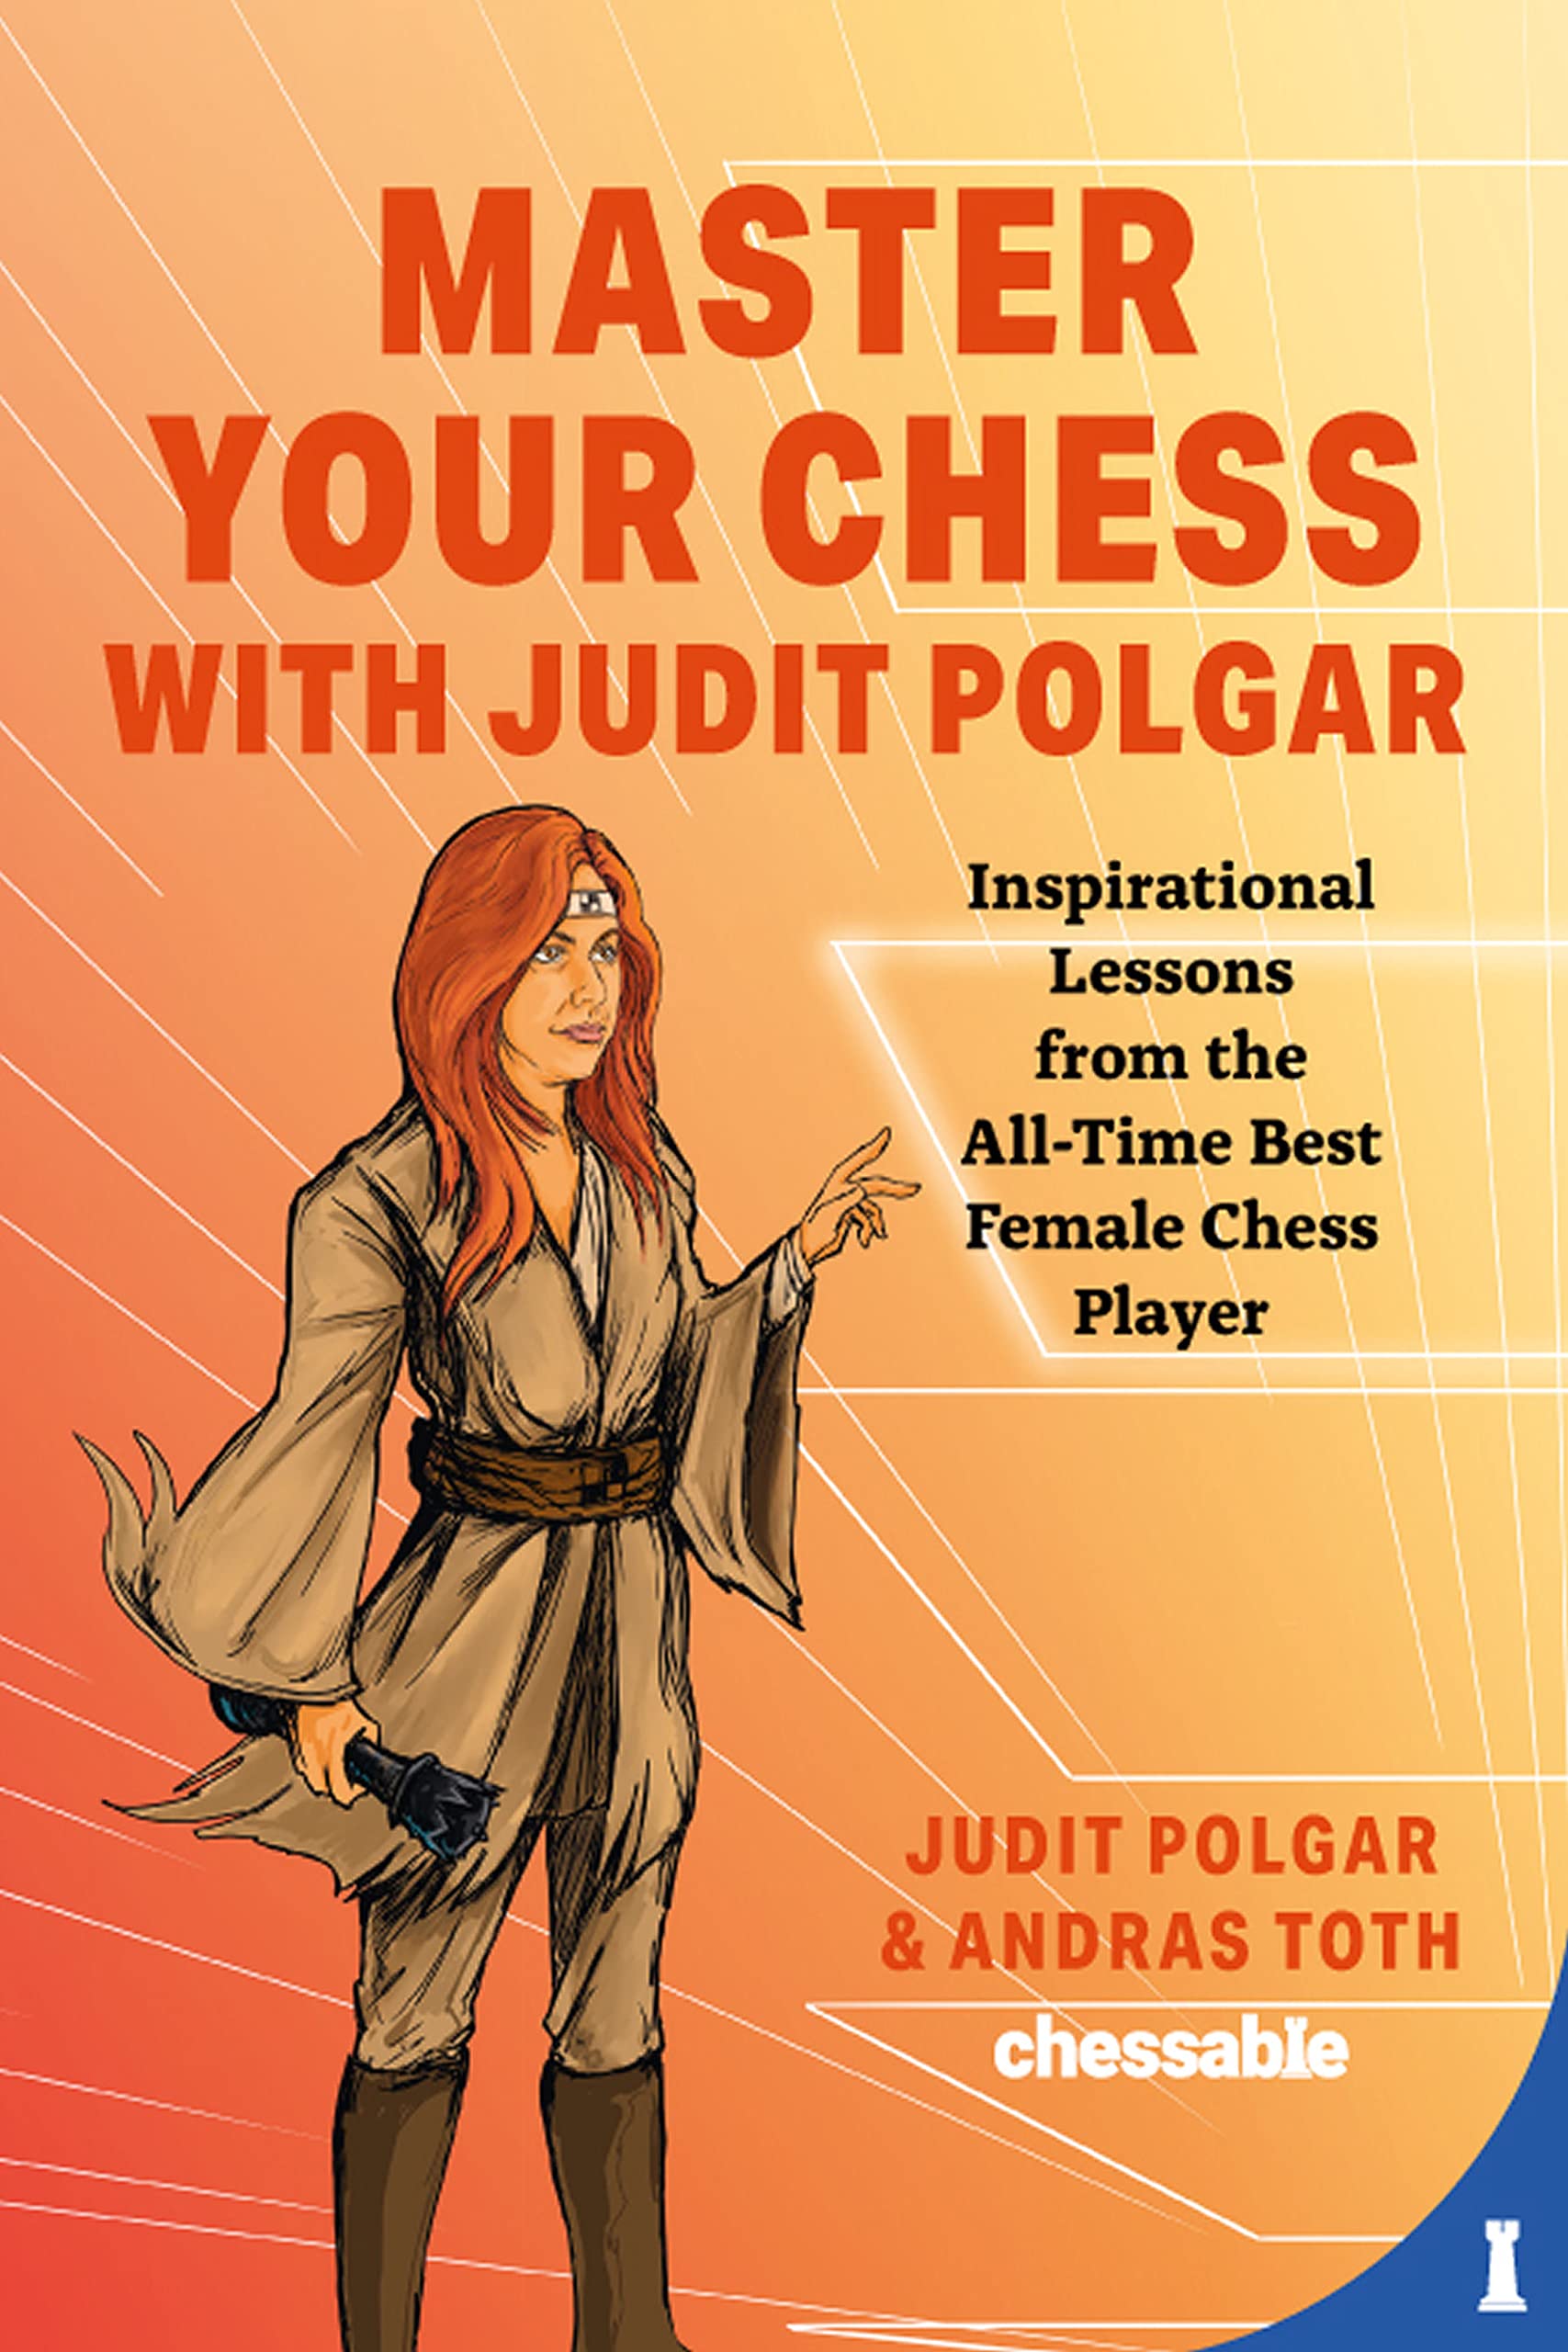 Master Your Chess with Judit Polgar: Inspirational Lessons from the All-Time Best Female Chess Player by Judit Polgar, Andras Toth, New in Chess, May 31st 2022, ISBN-13 ‏ : ‎ 978-9493257337